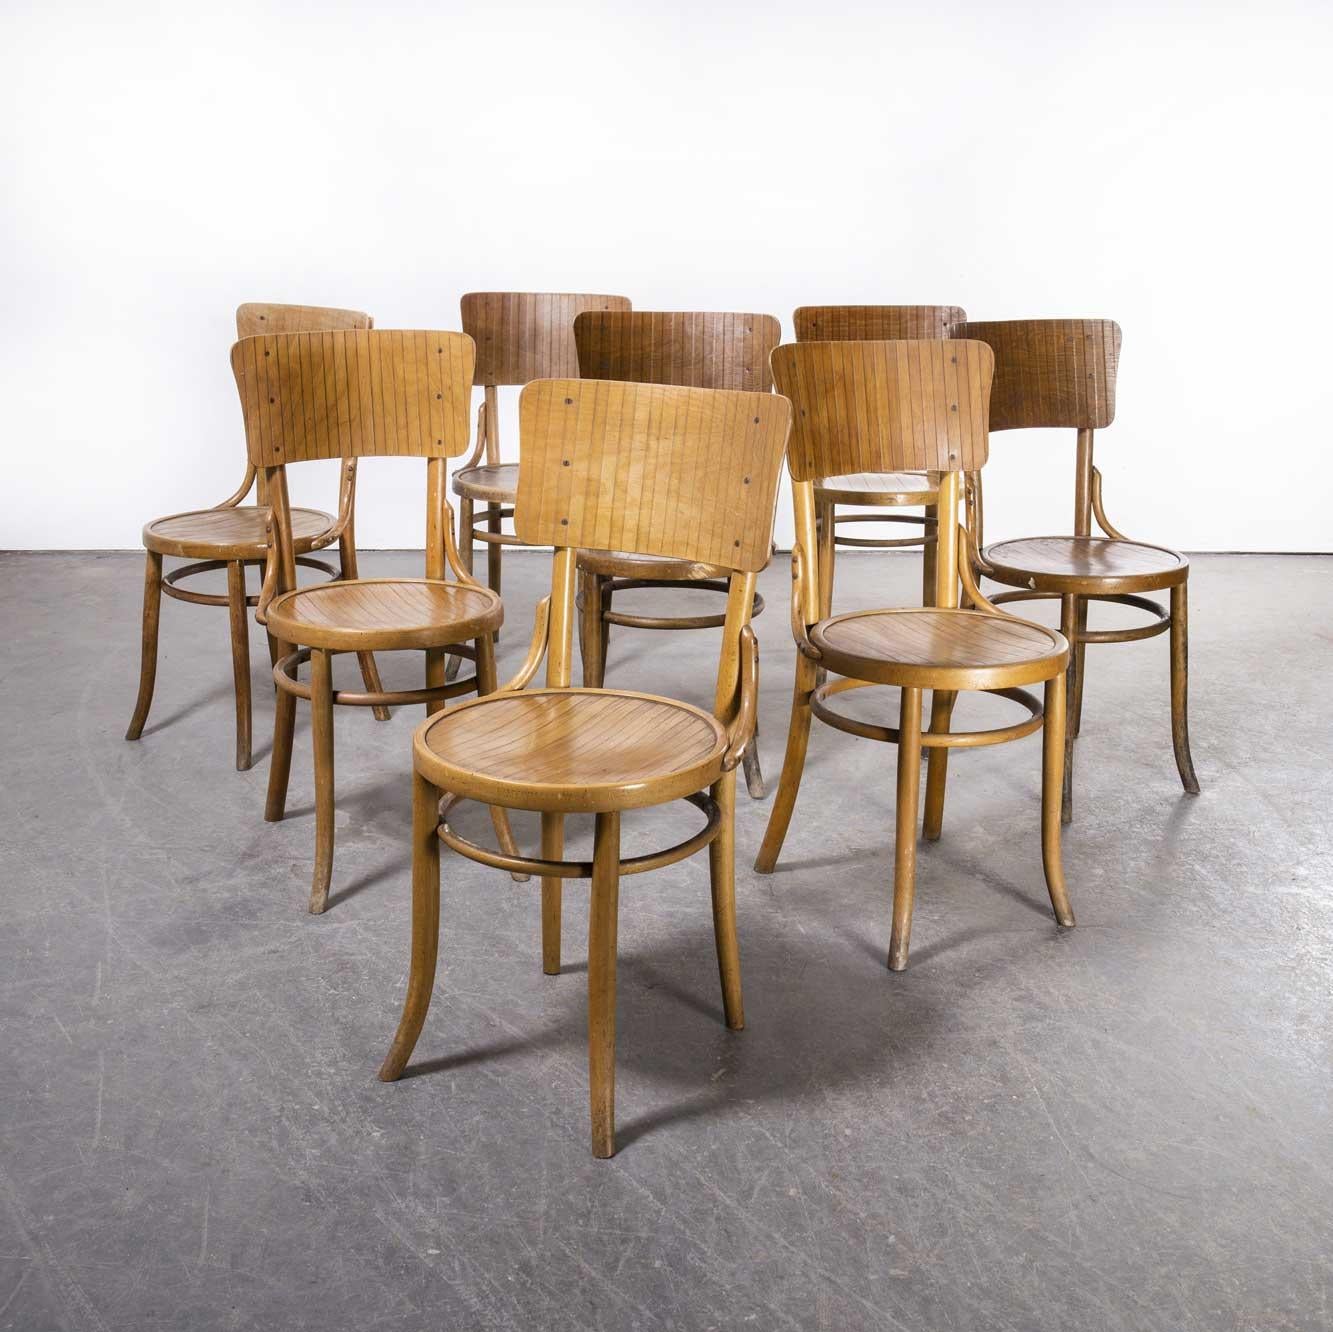 1950’s Bentwood Debrecen dining chairs – Set of eight
1950’s Bentwood Debrecen dining chairs – Set of eight. It is hard to be precise about the origin of these chairs as little history is known, but what we do know is at the beginning of the 20th